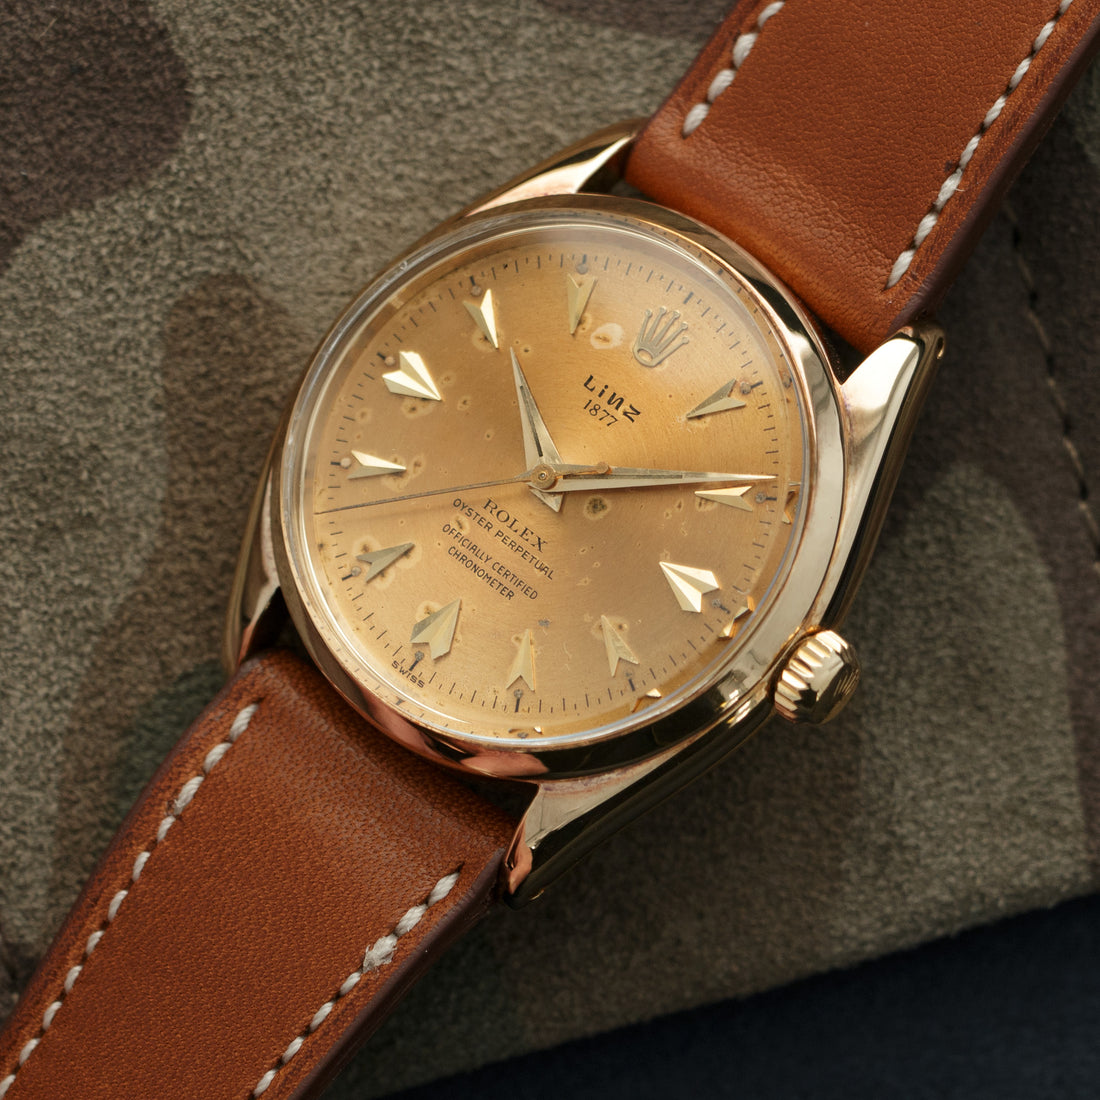 Rolex Yellow Gold Oyster Perpetual Watch, Ref. 6465 Retailed by Linz